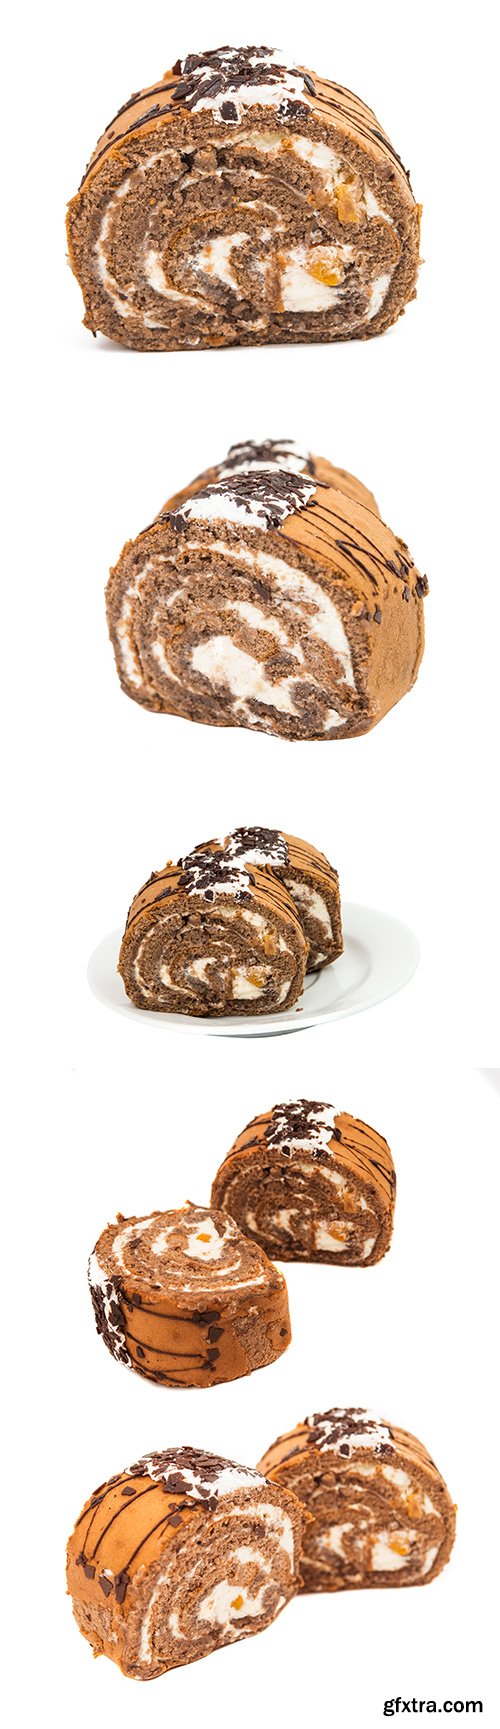 Swiss Roll Isolated - 8xJPGs